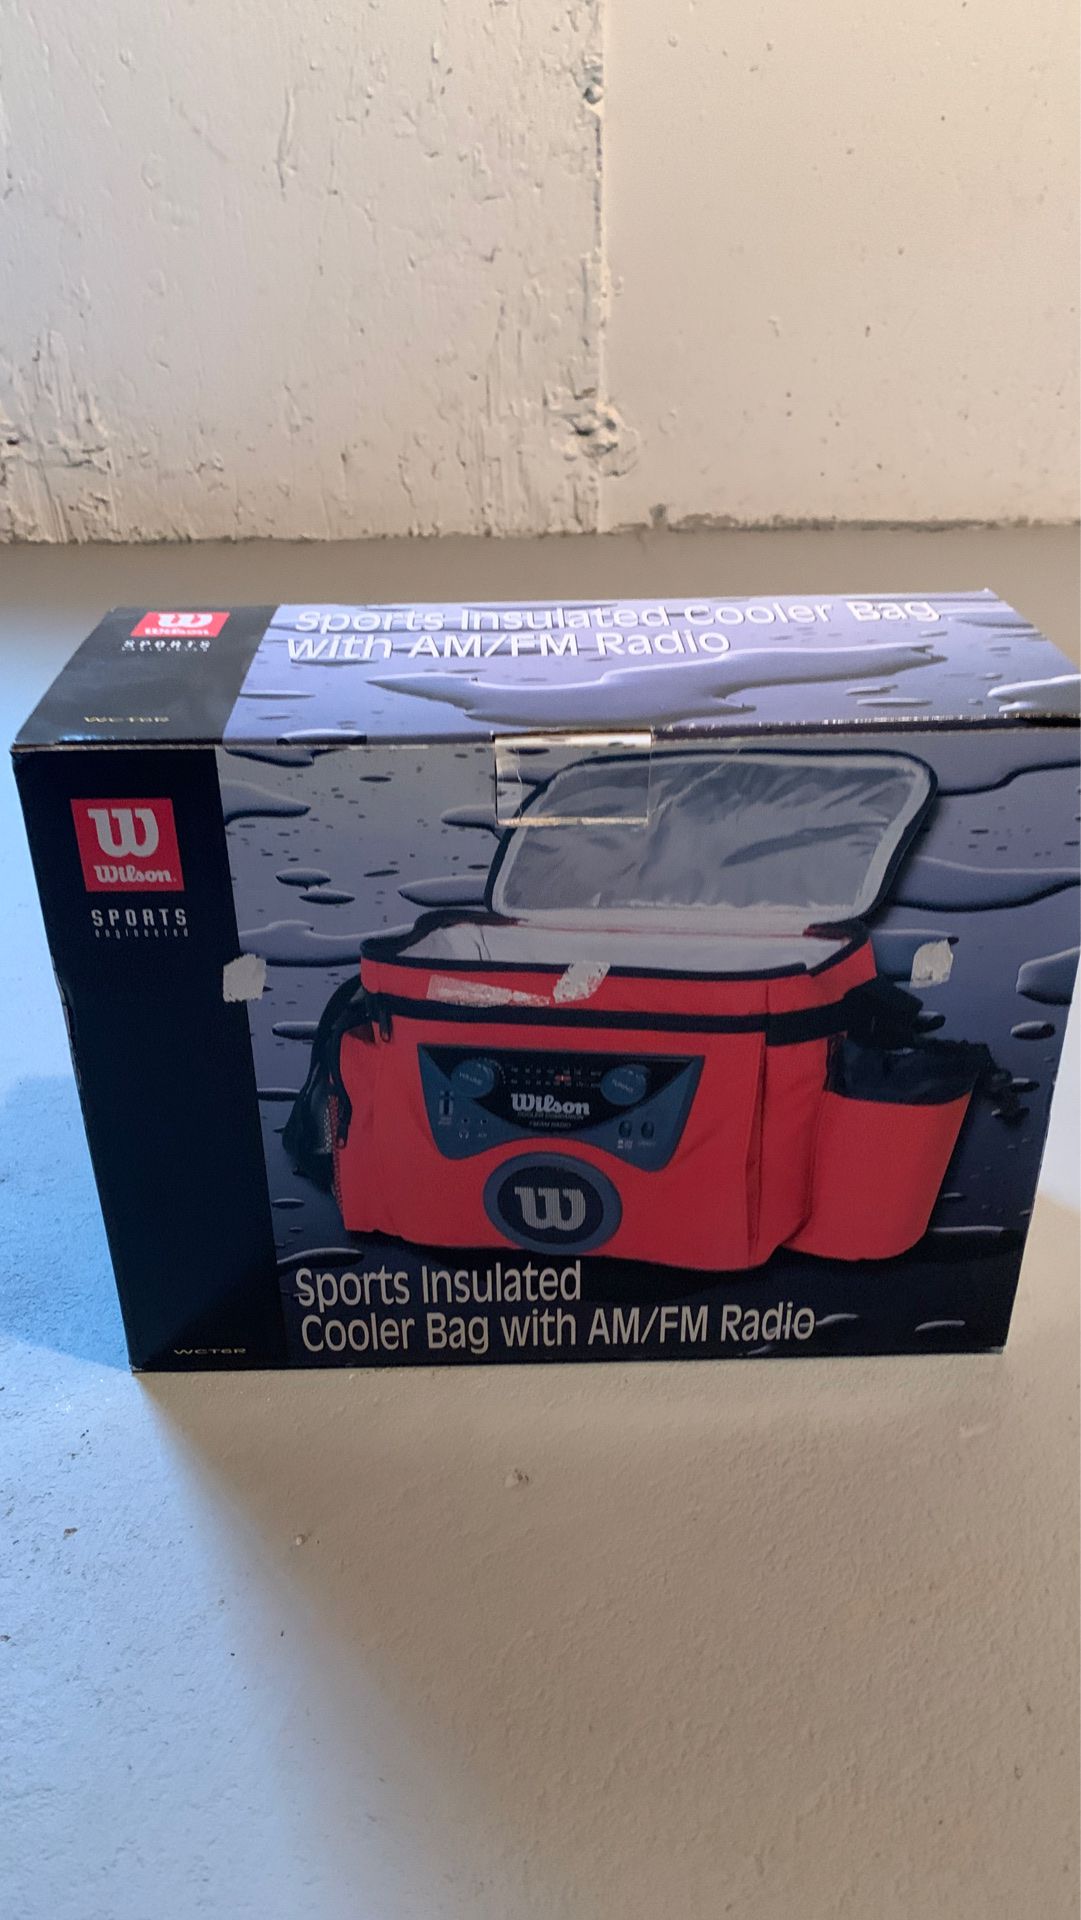 Wilson sports insulated cooler bag with radio